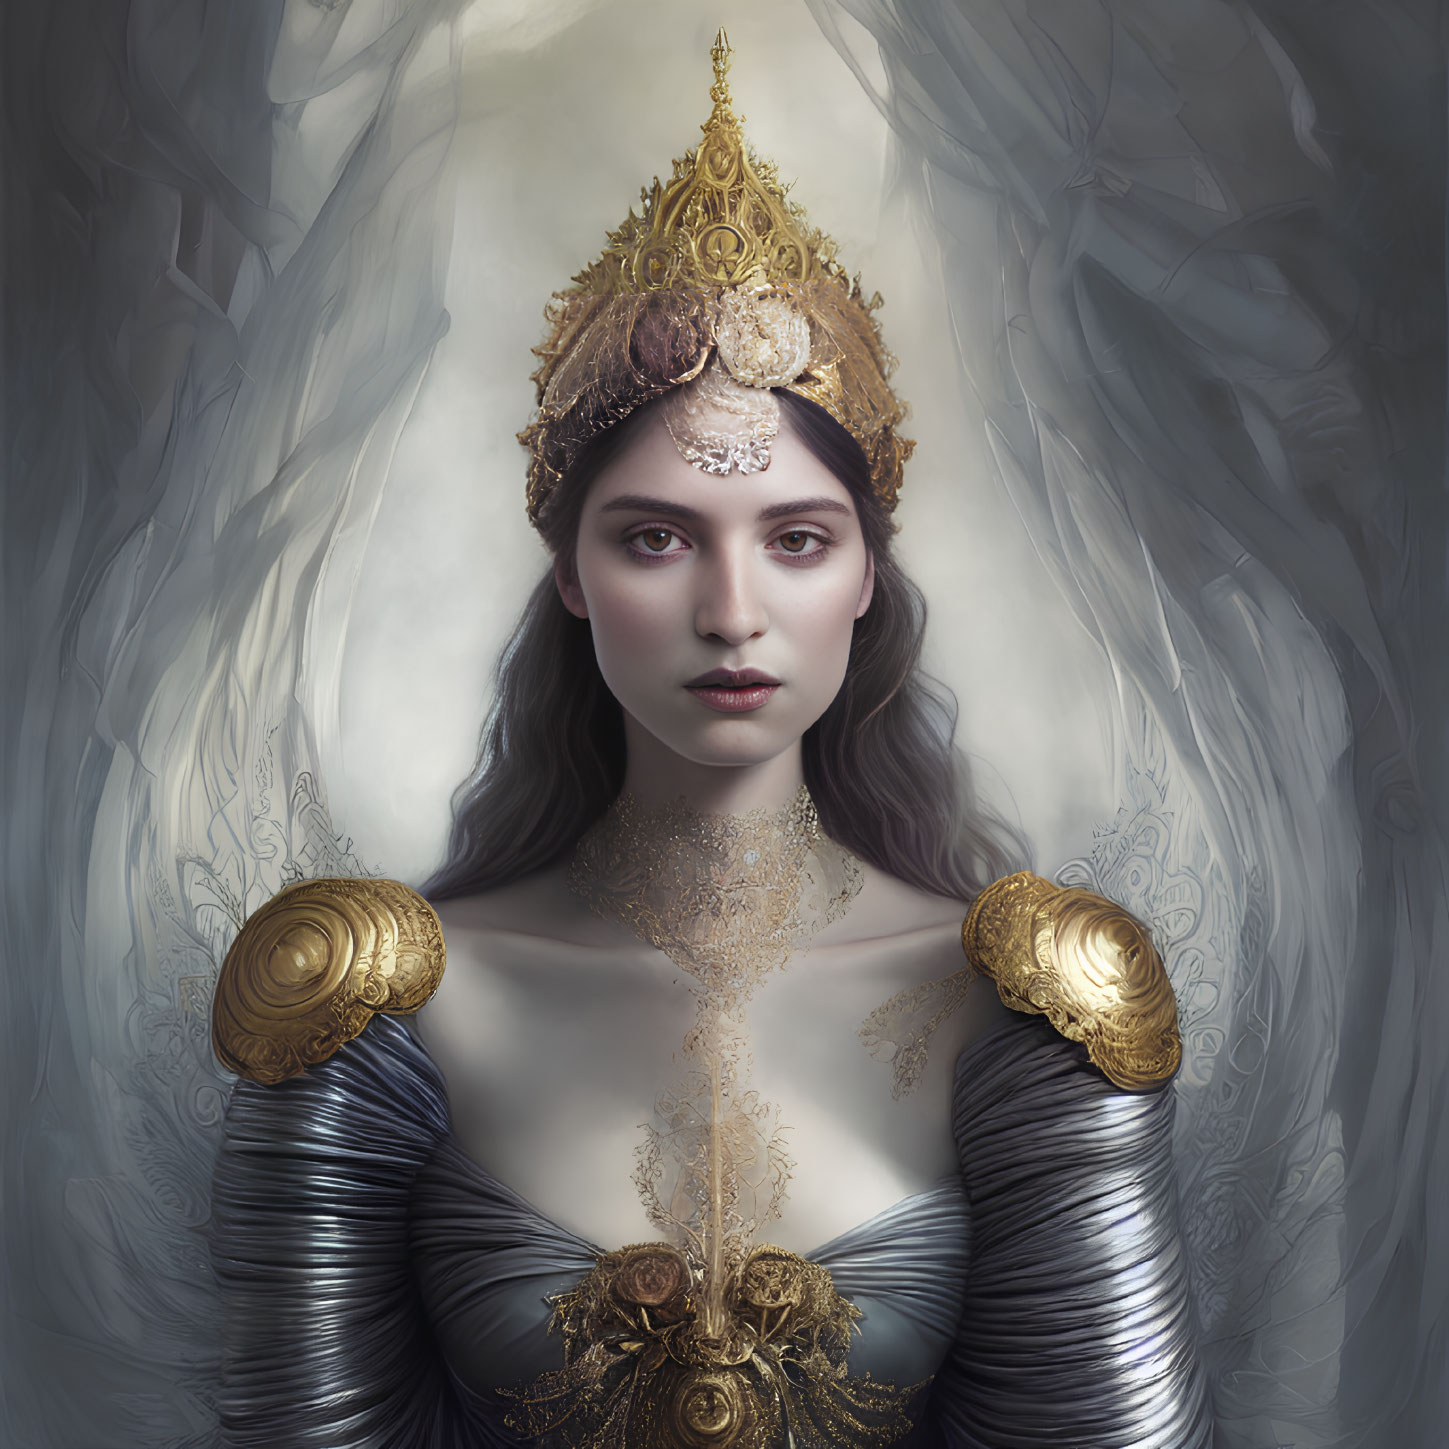 Regal woman in golden crown against misty background